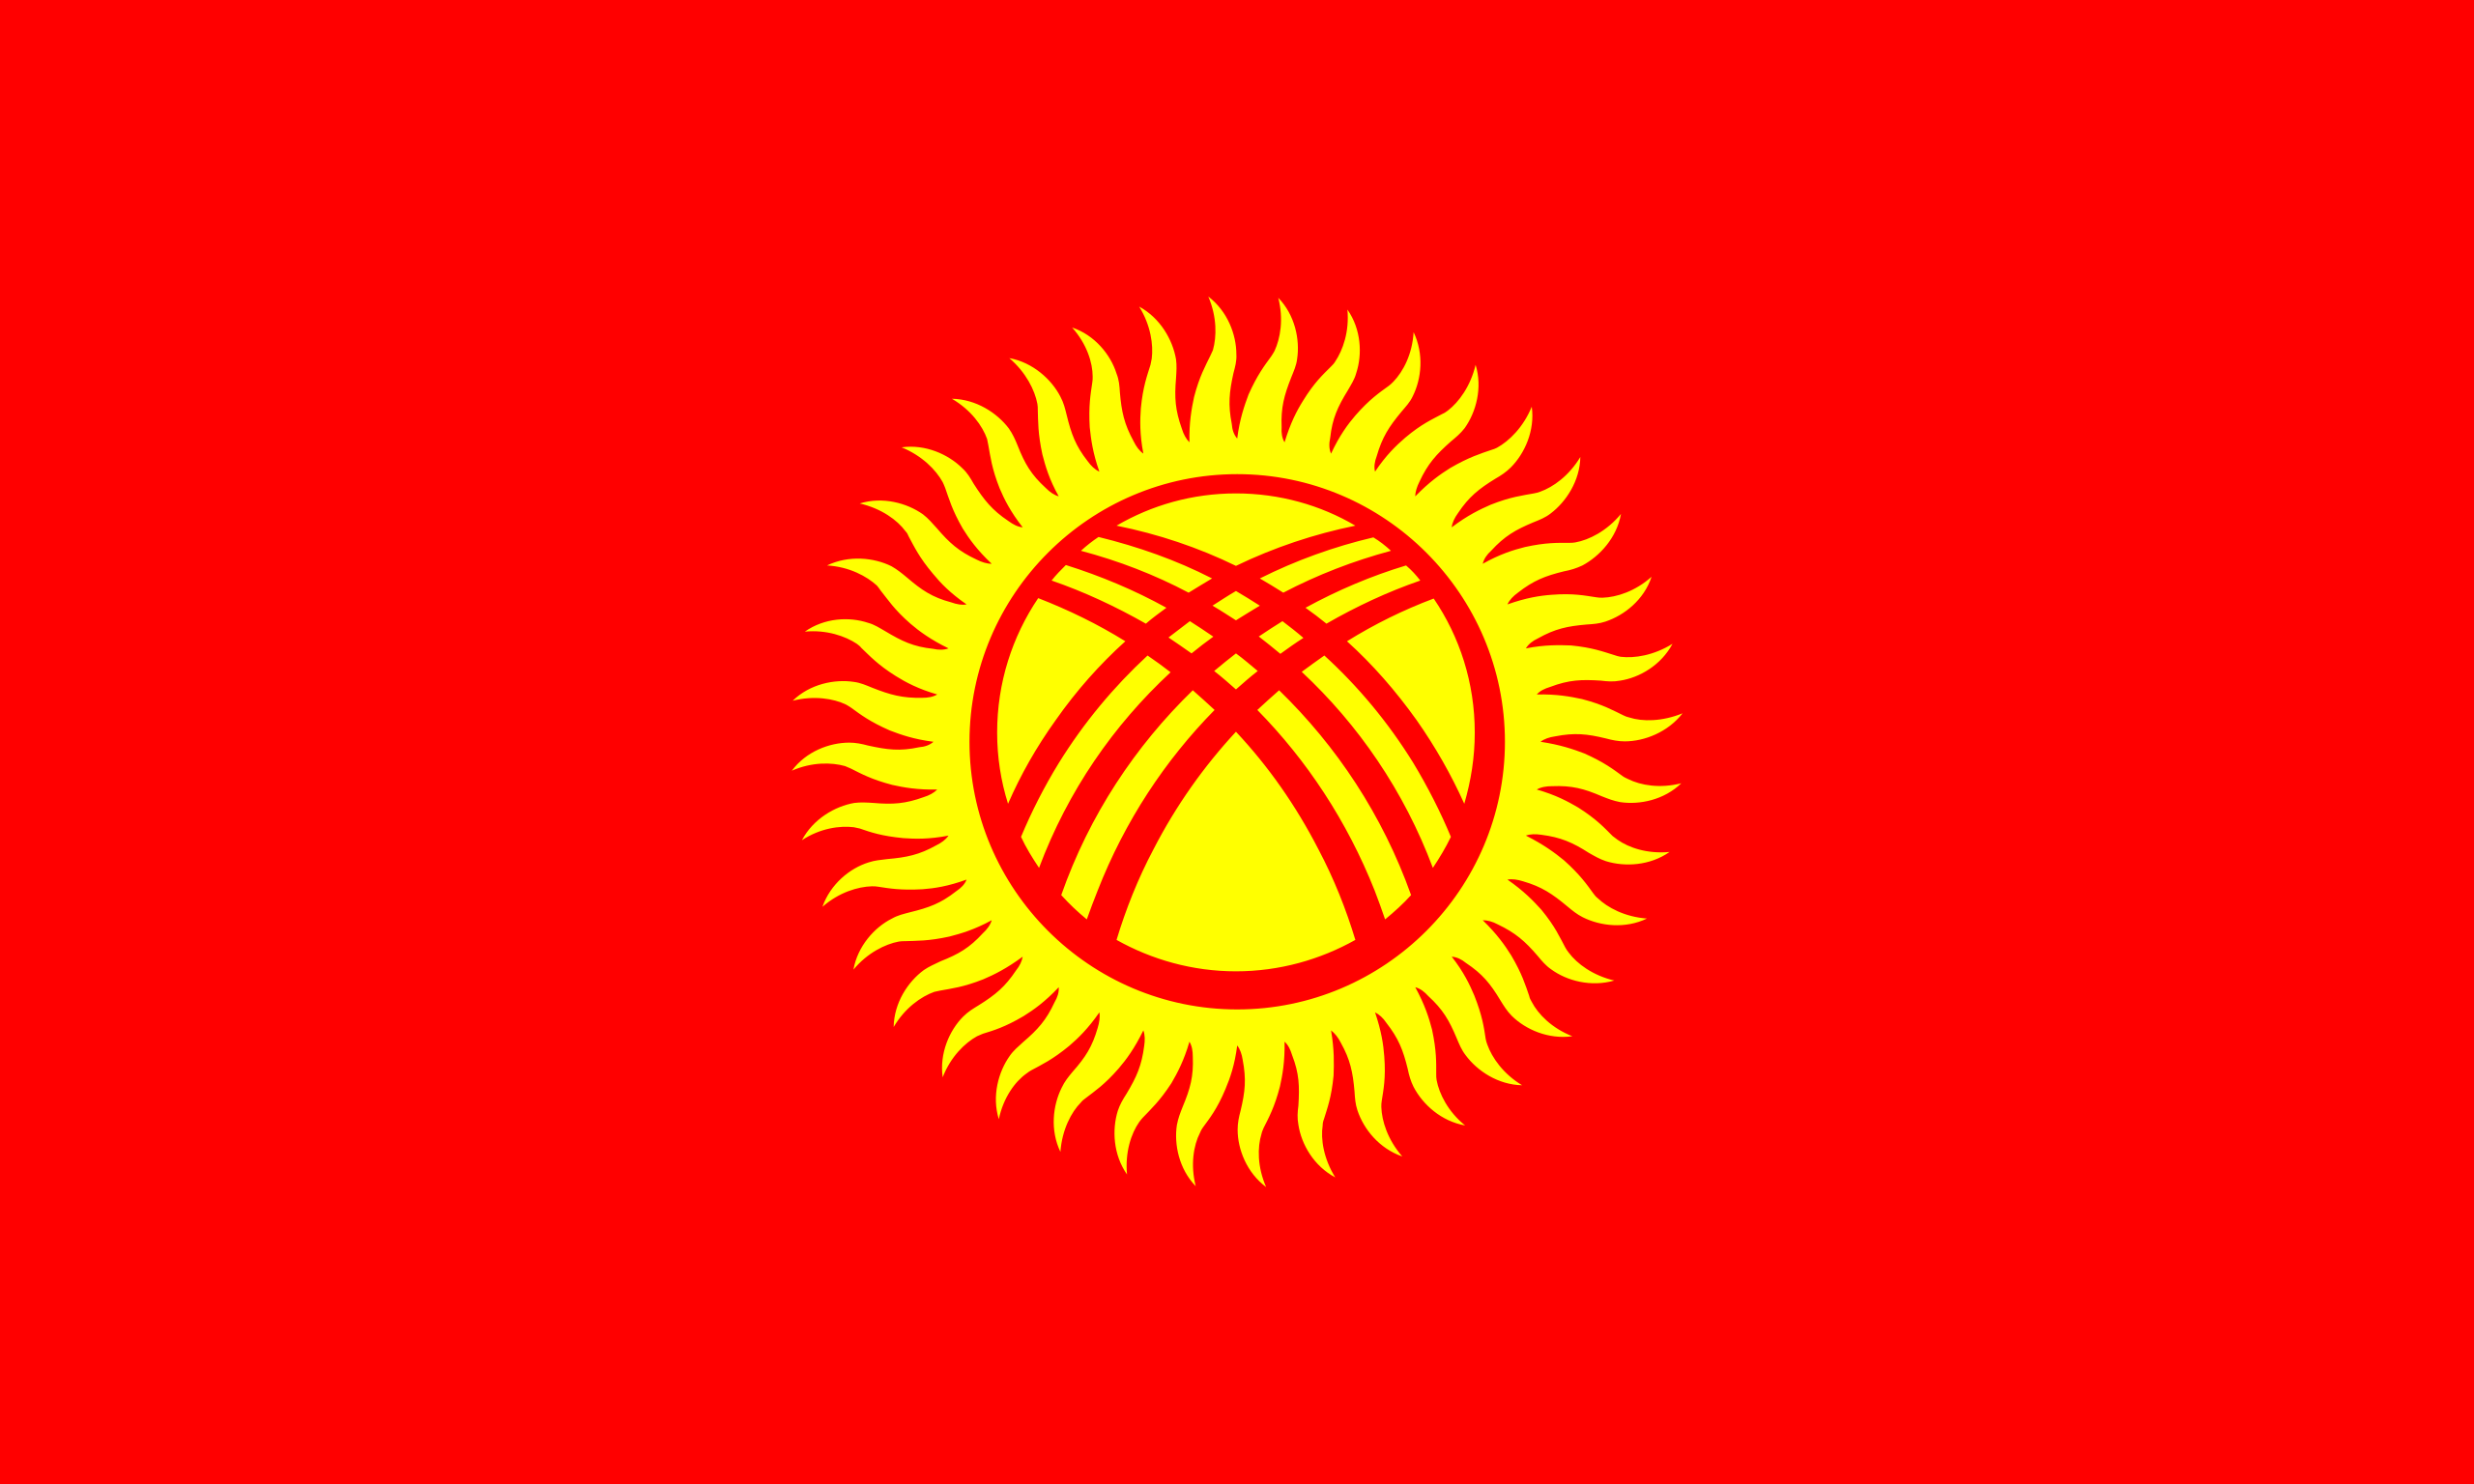 A red flag with a yellow sun.